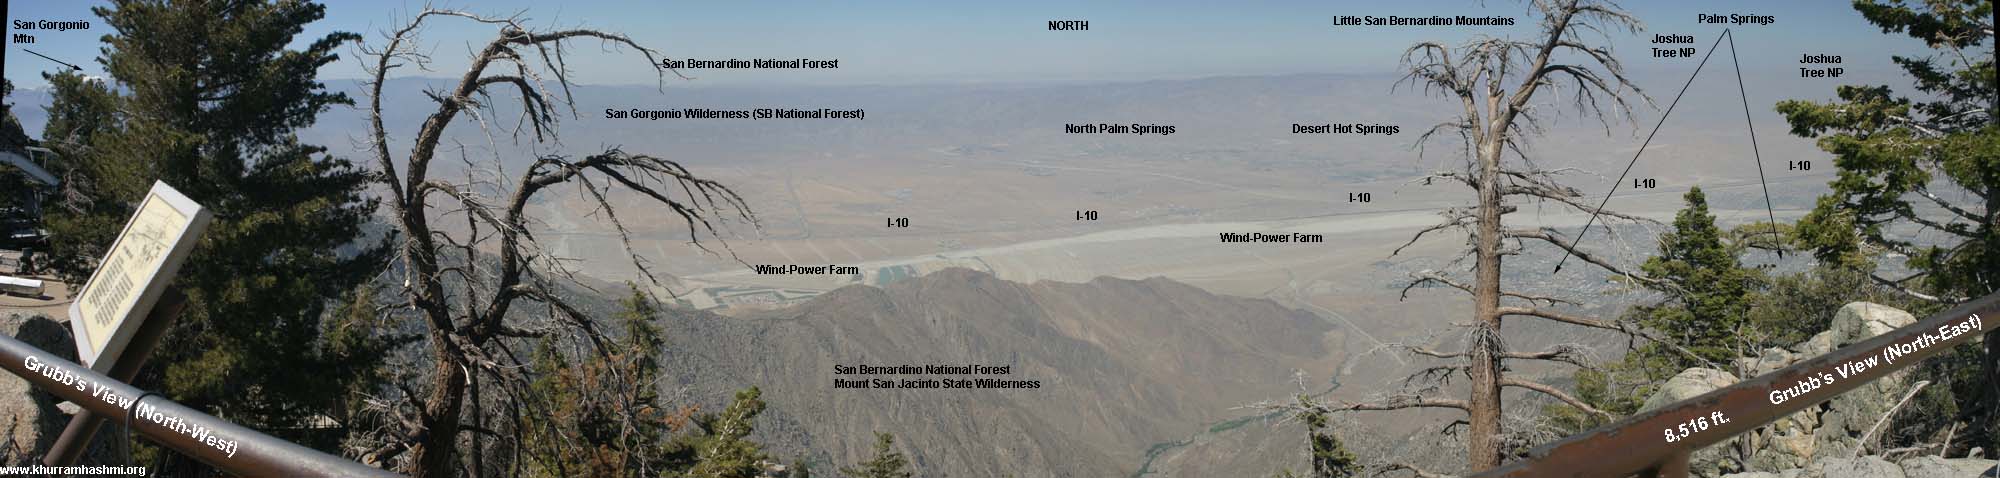 Panoramic view of the Coachella Valley